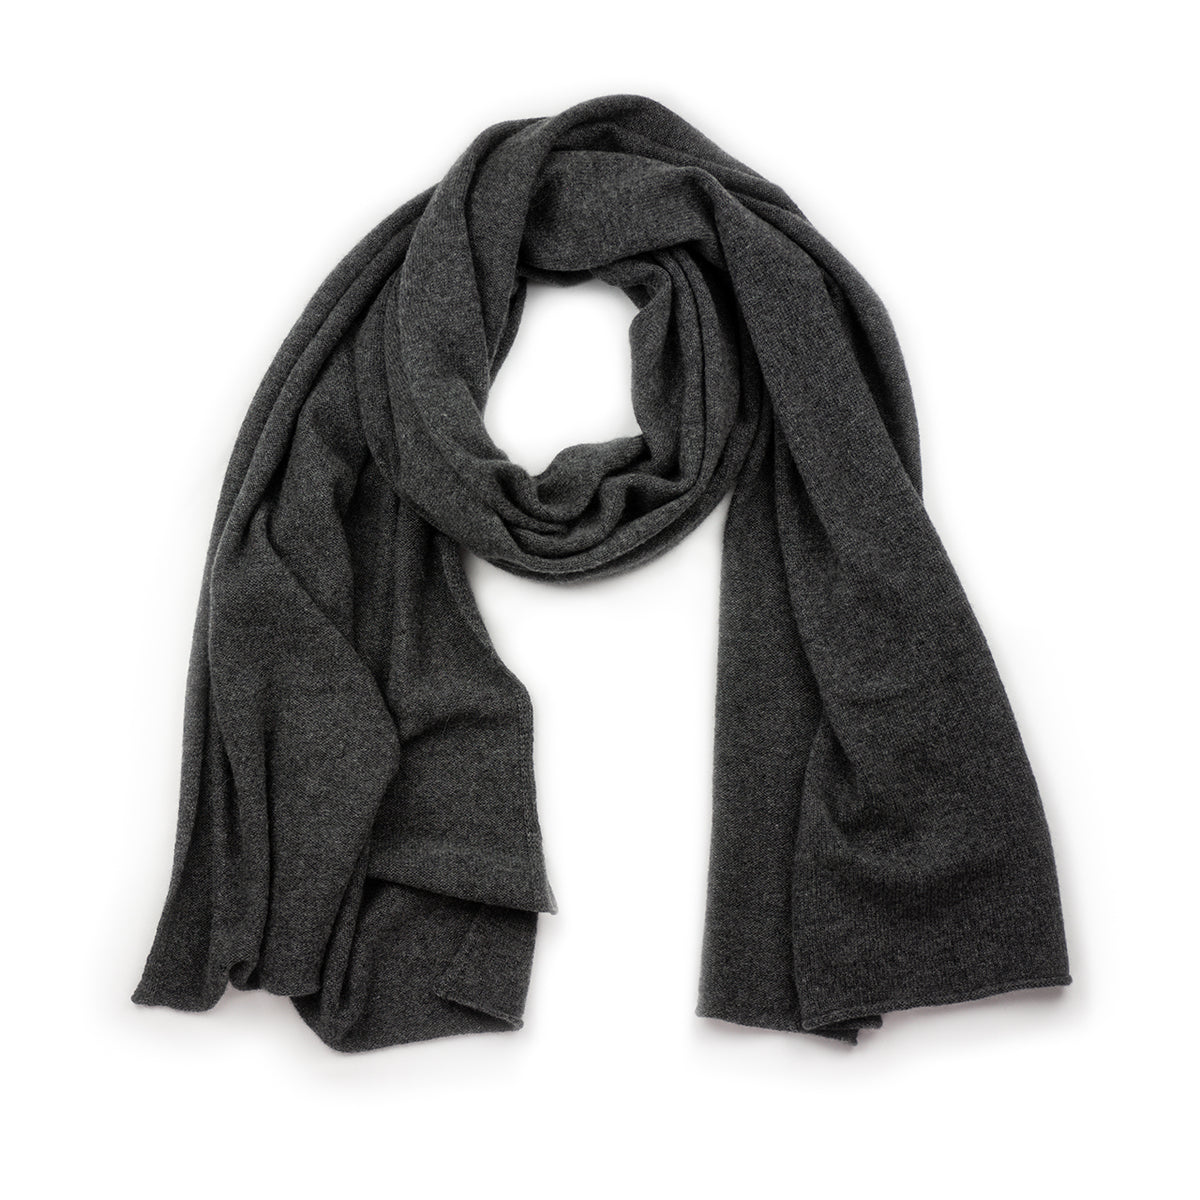 100% CASHMERE CHARCOAL WRAP SCARF